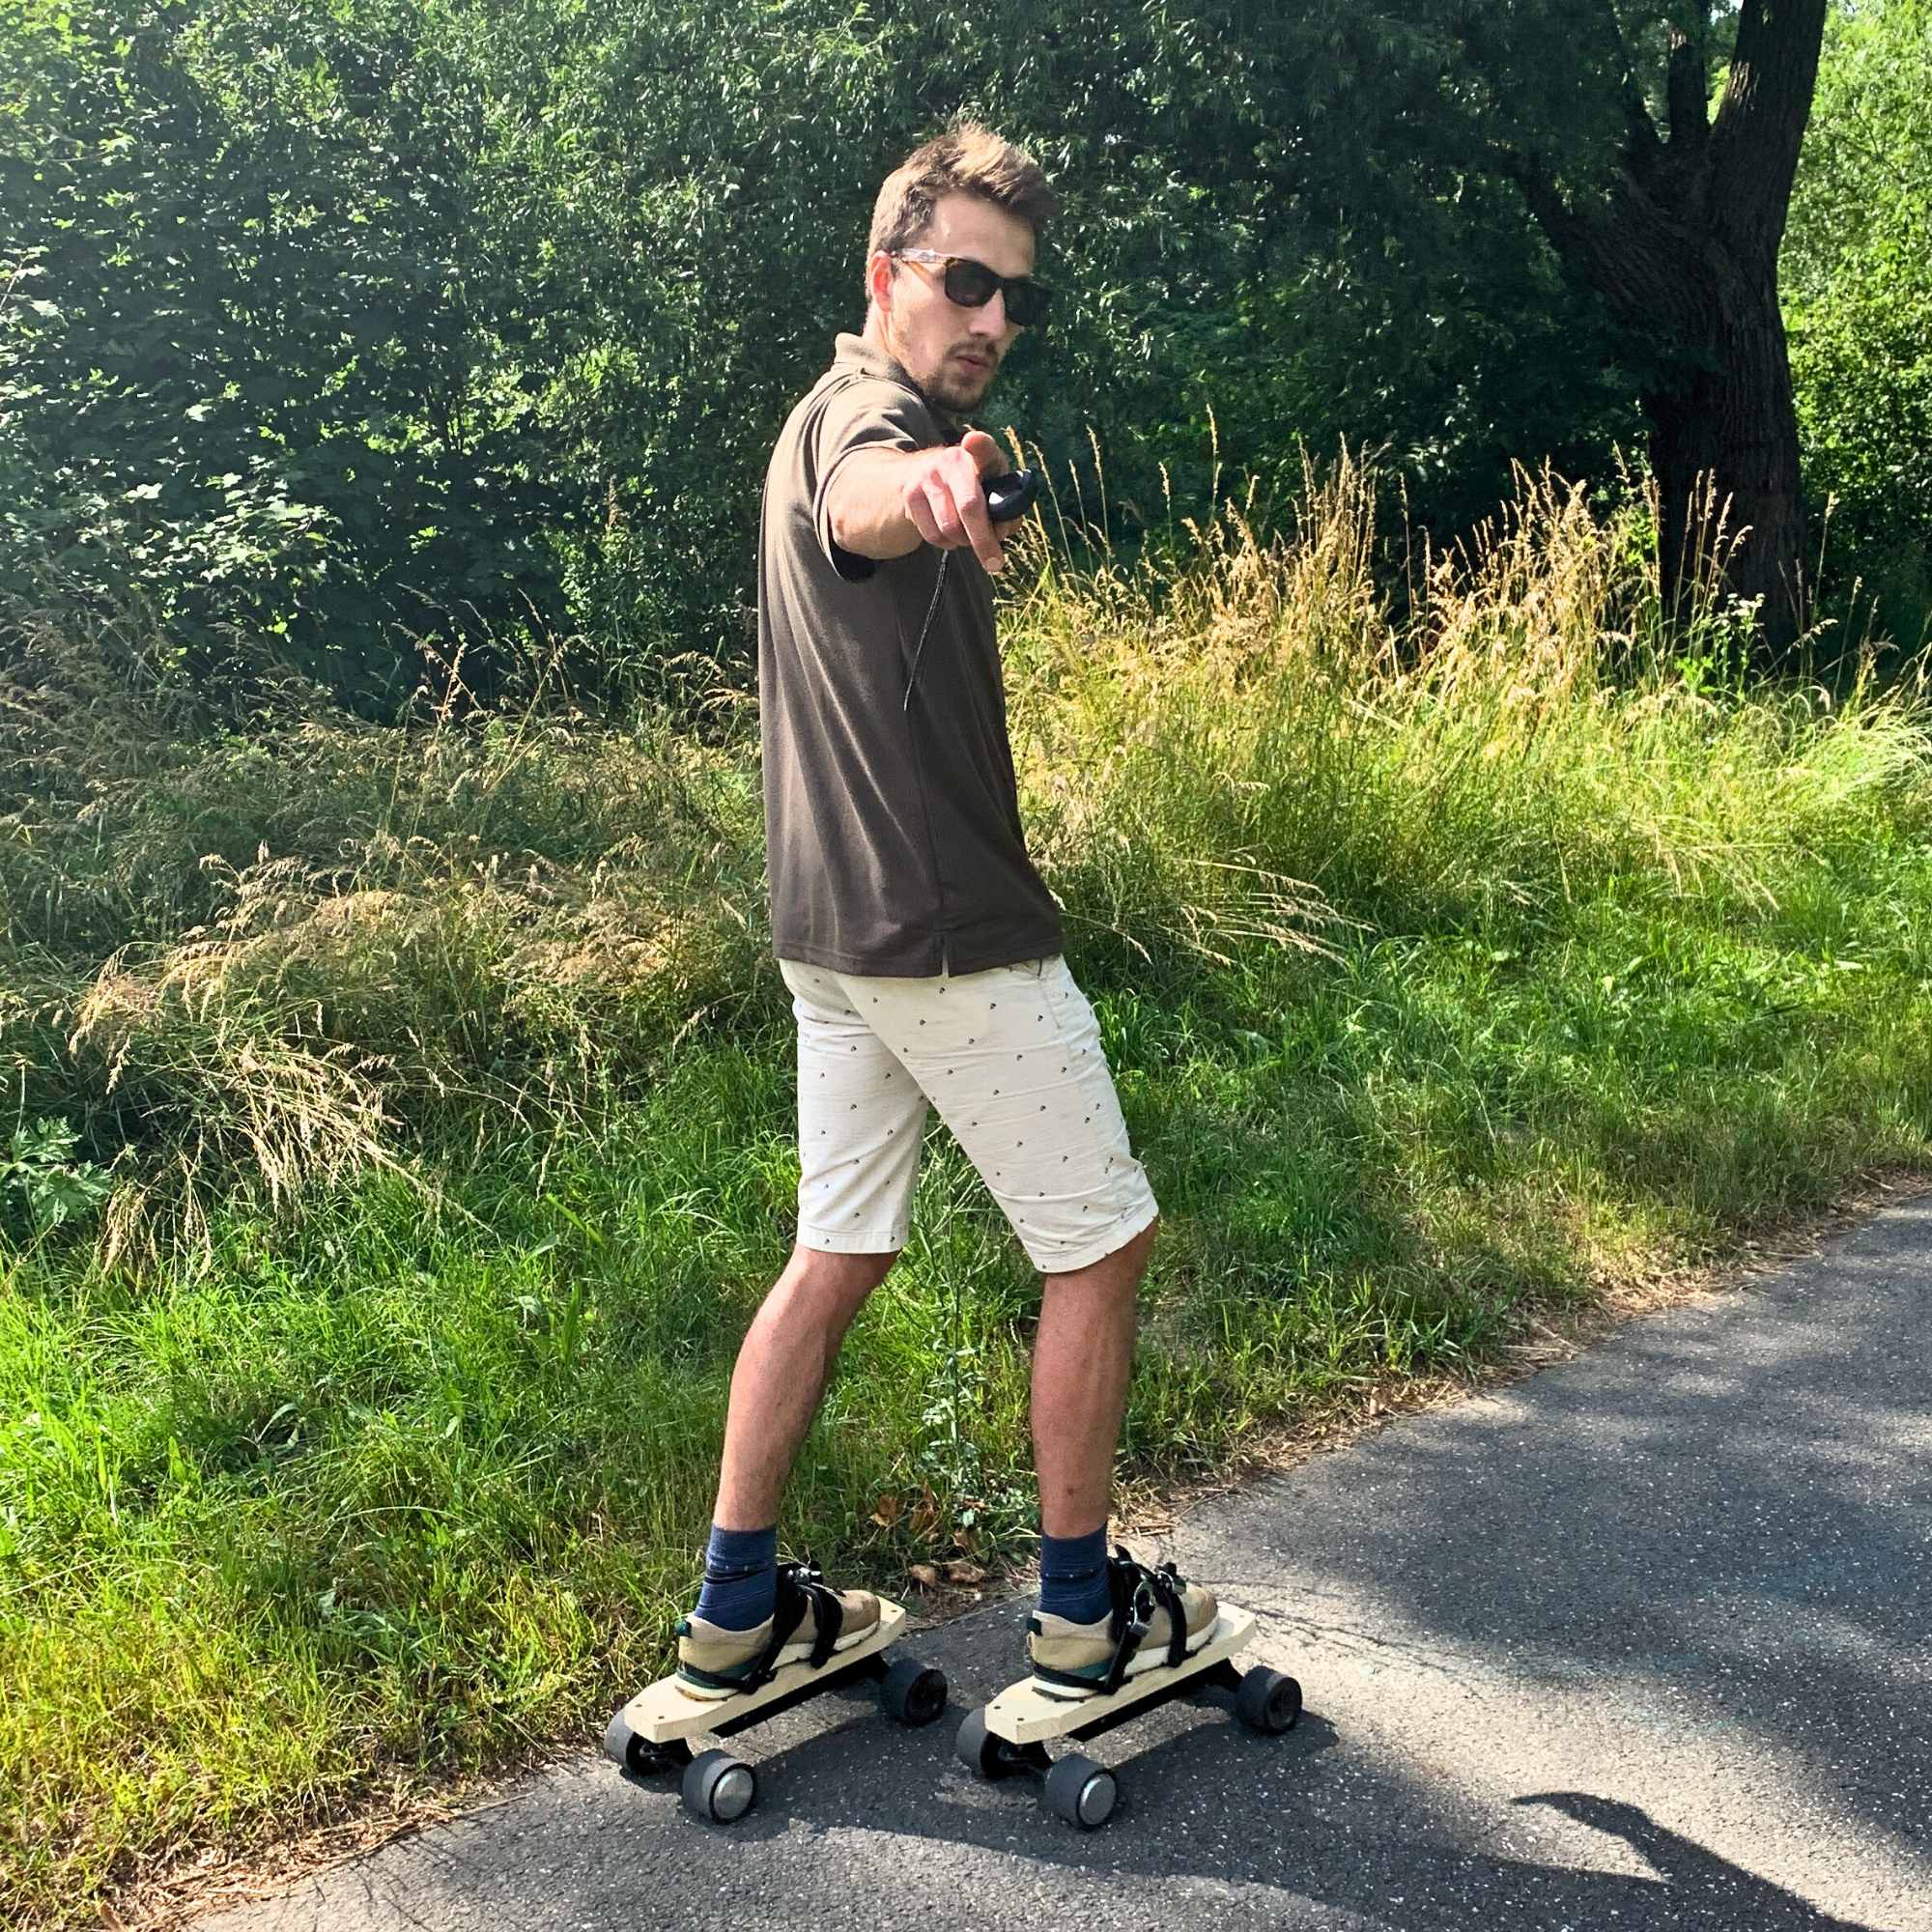 DIY Electric Skates from E-skateboard Kit | Electric Rollerblades